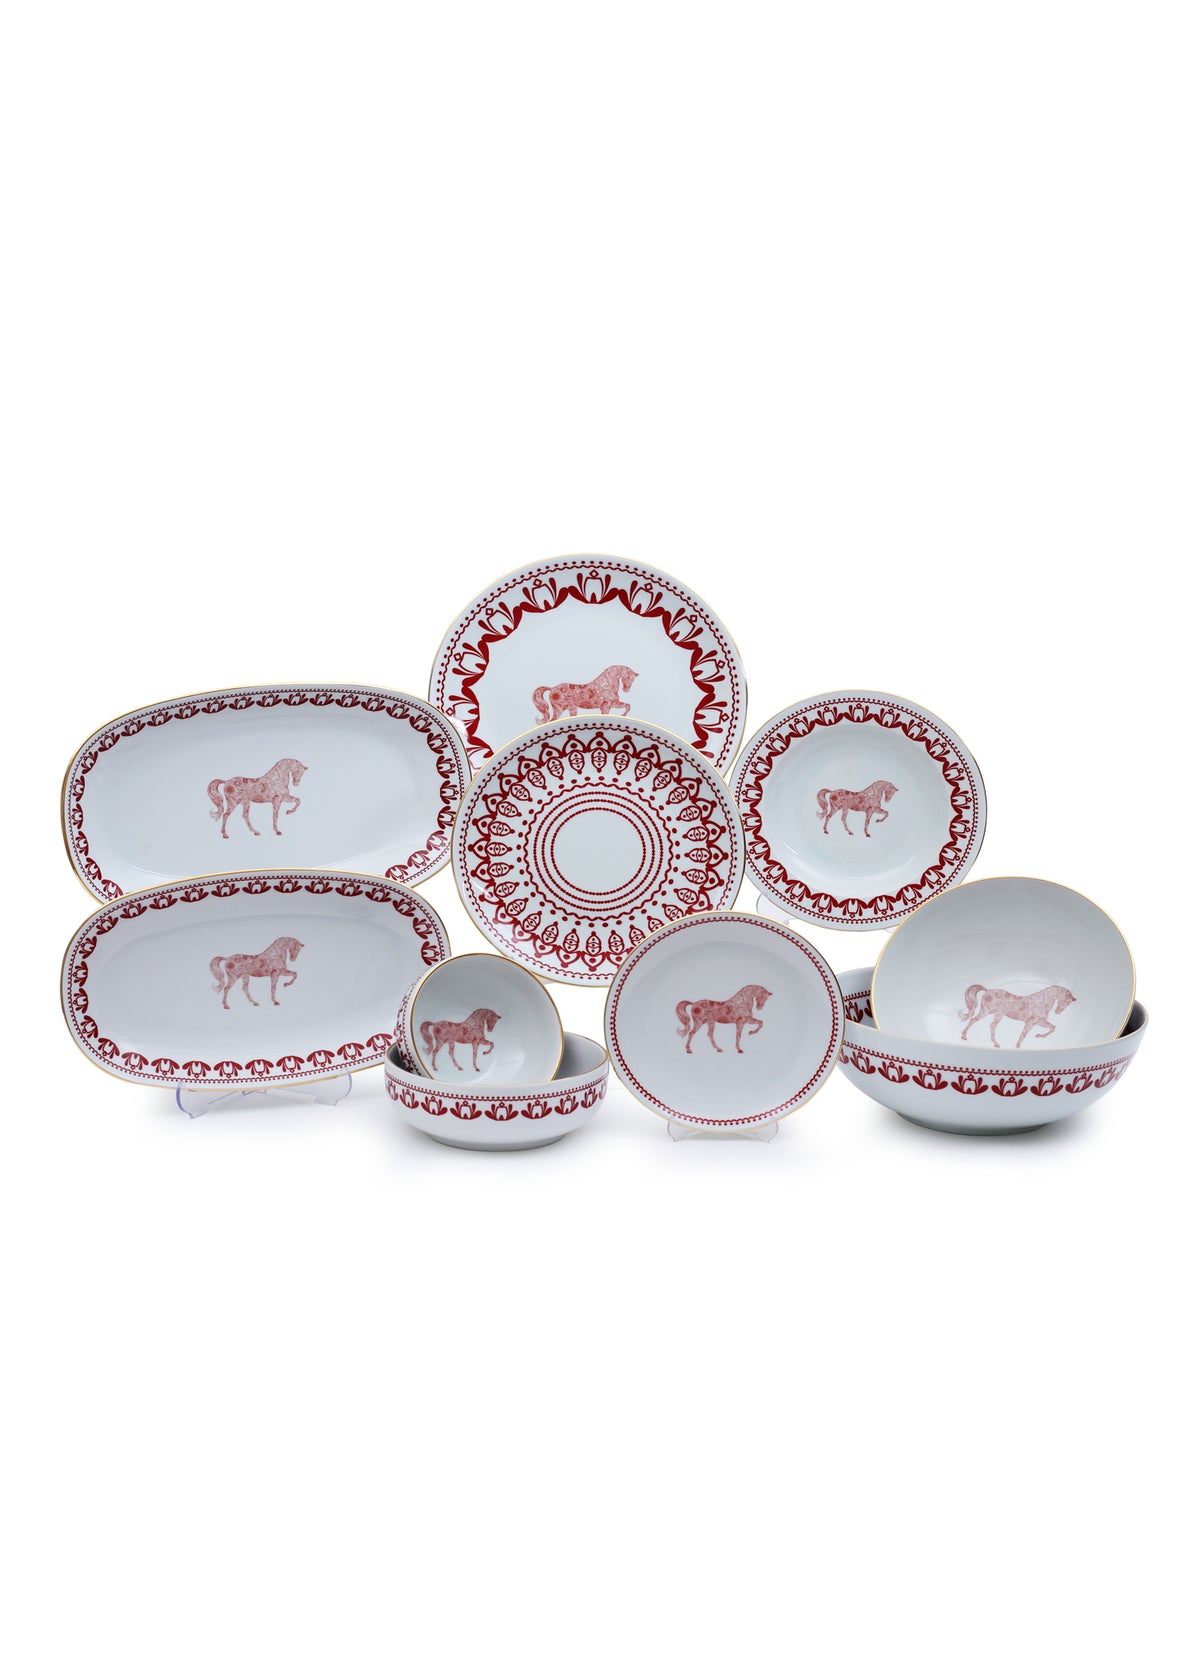 Horse Luck Collection Red - Set of 6 Plates (46 pieces)